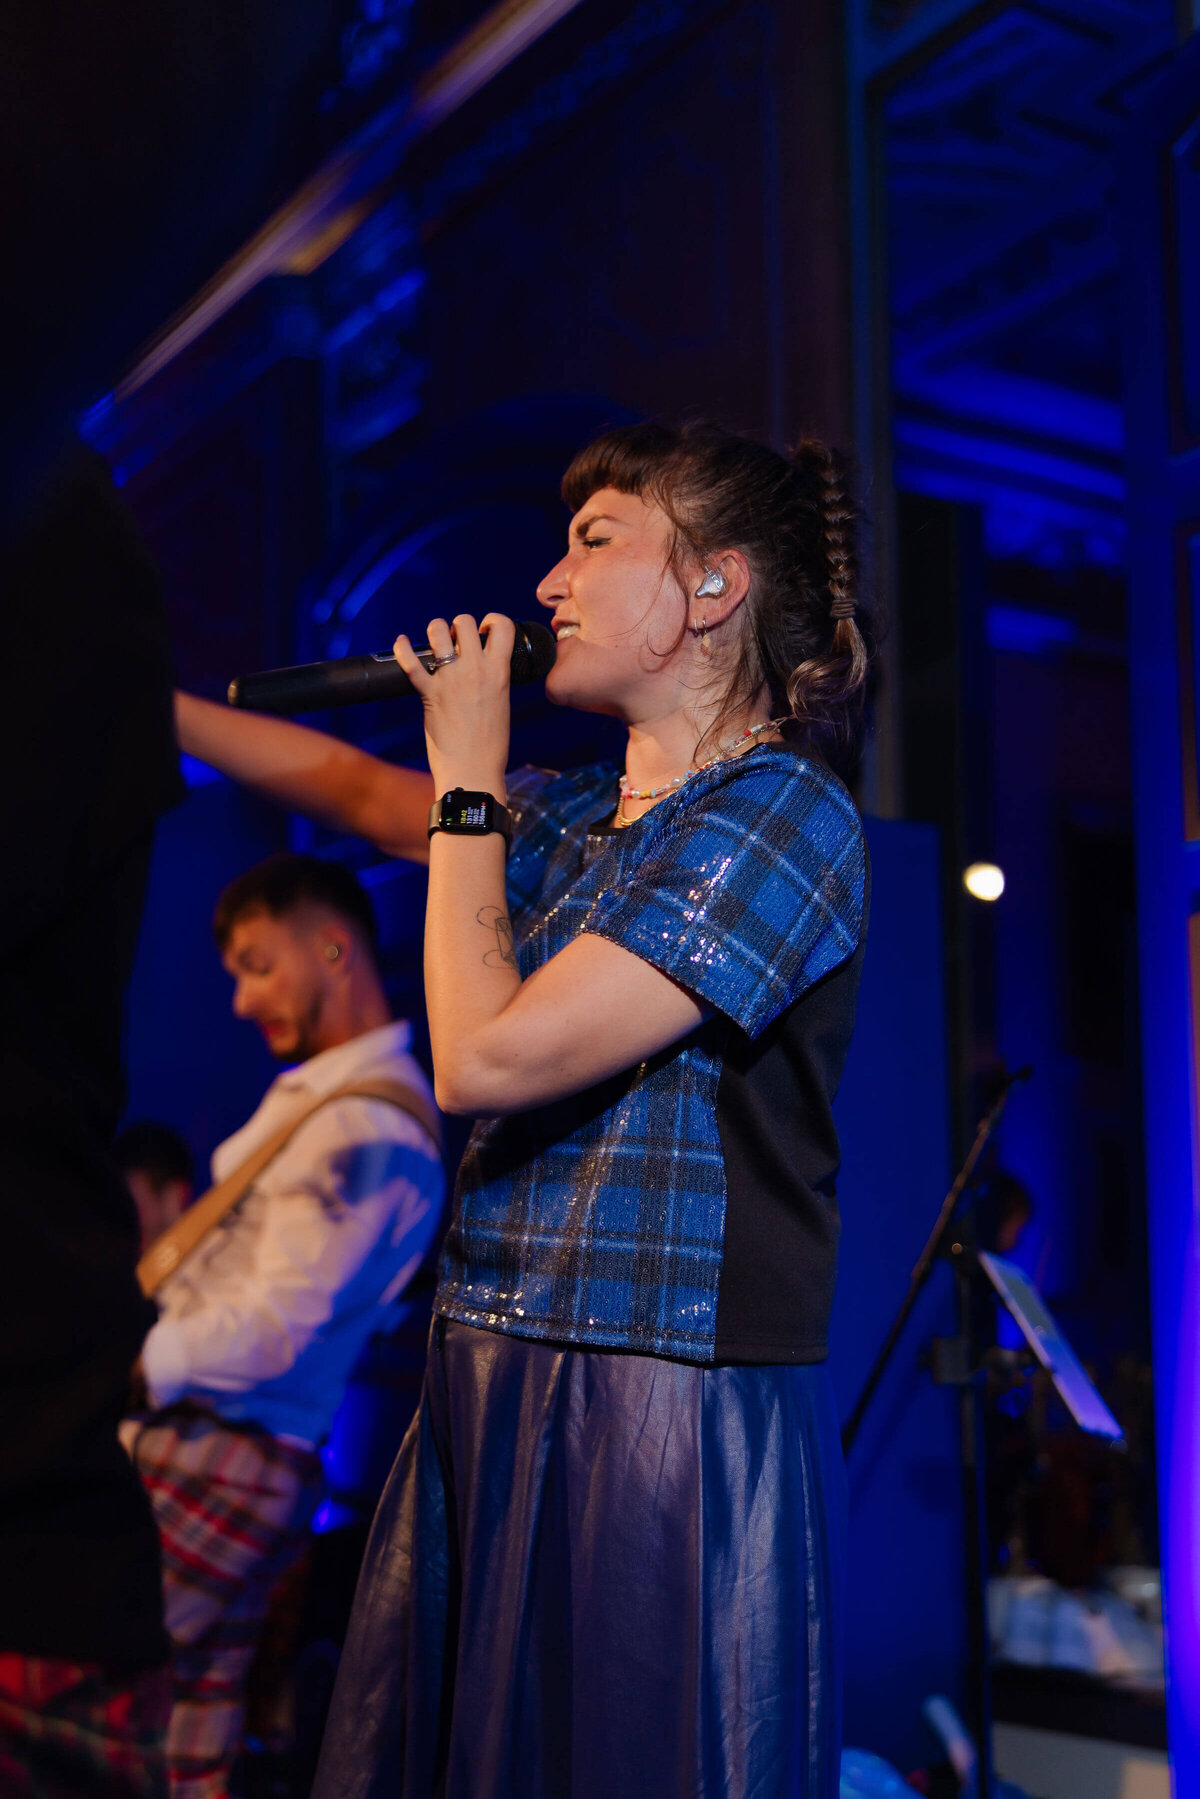 female singer performing on stage in the ballroom which is washed in blue light at avington park for a 50th birthday party